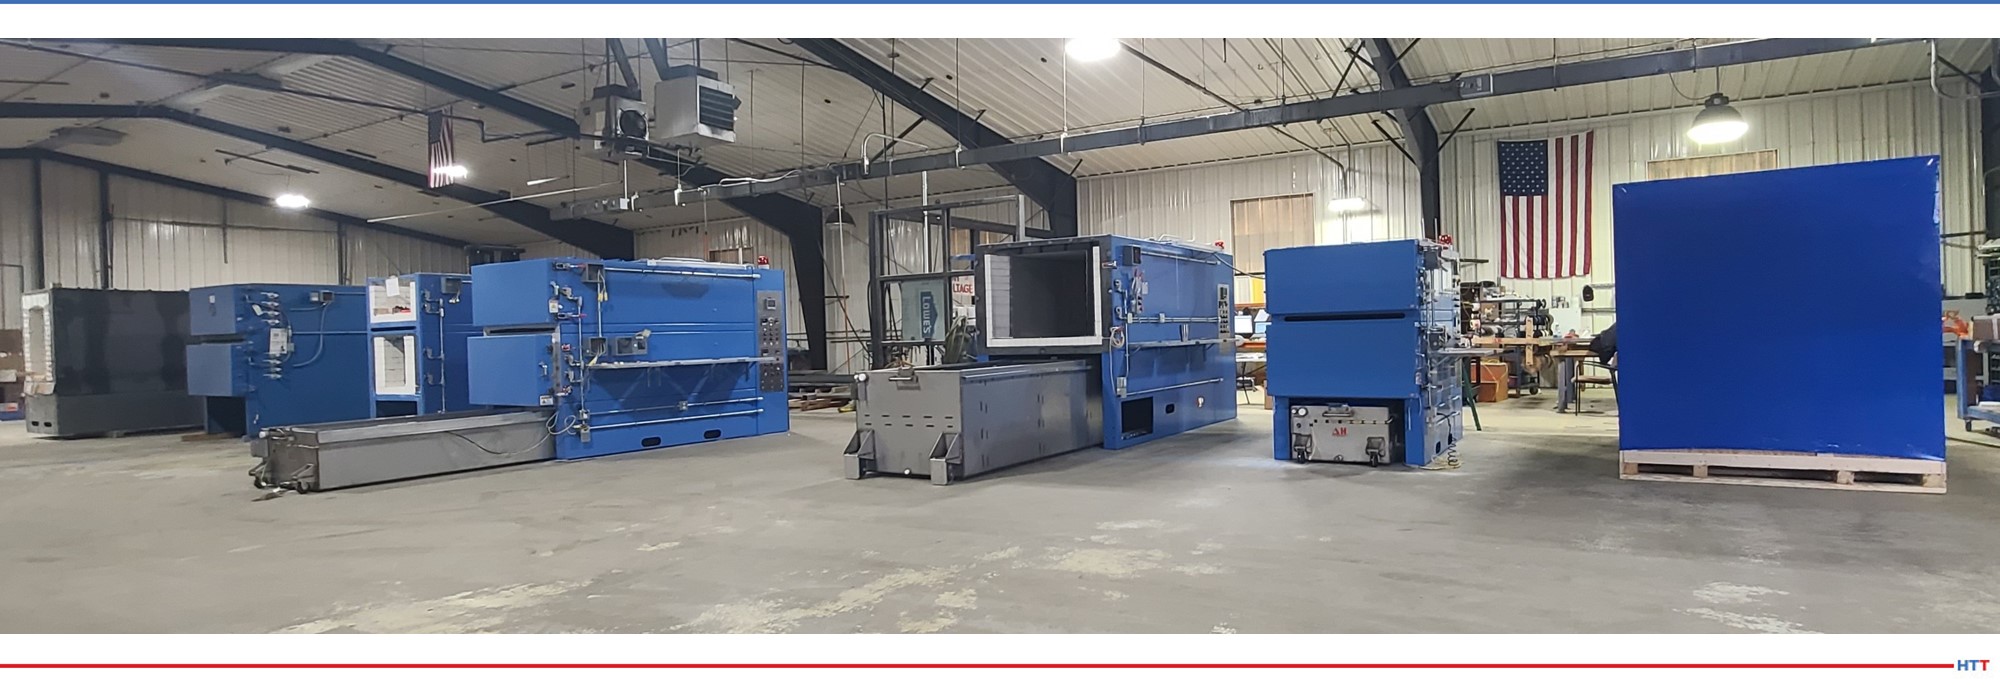 7 Heat Treat Furnaces Shipped to Manufacturers in Aerospace and Defense Post Thumbnail